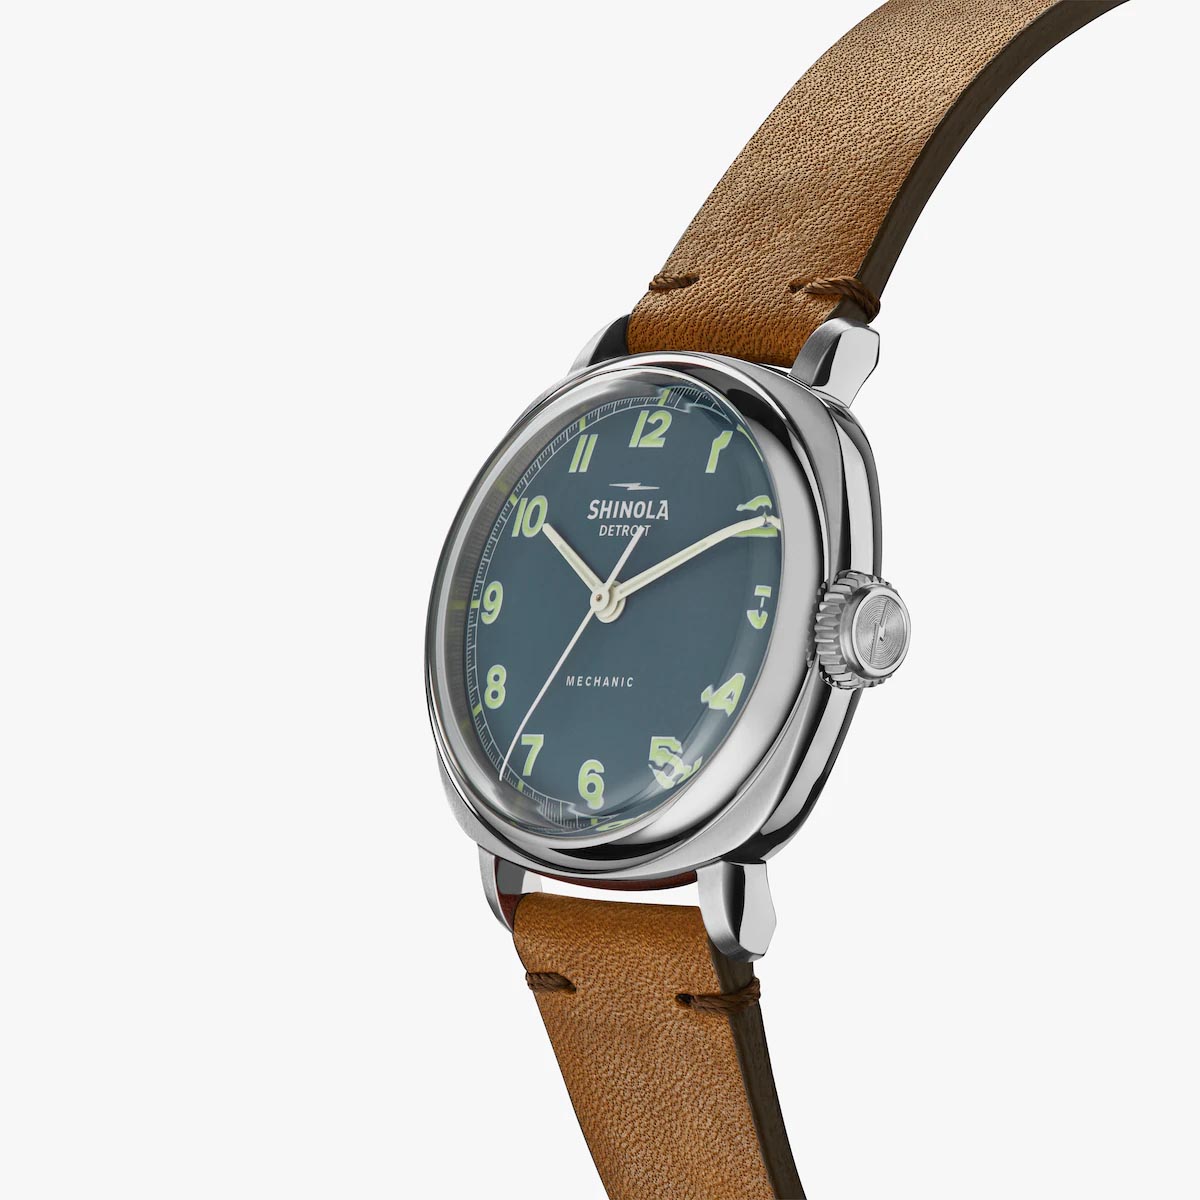 Shinola Mechanic Mens Watch with Blue Dial and Brown Leather Strap (manual movement)